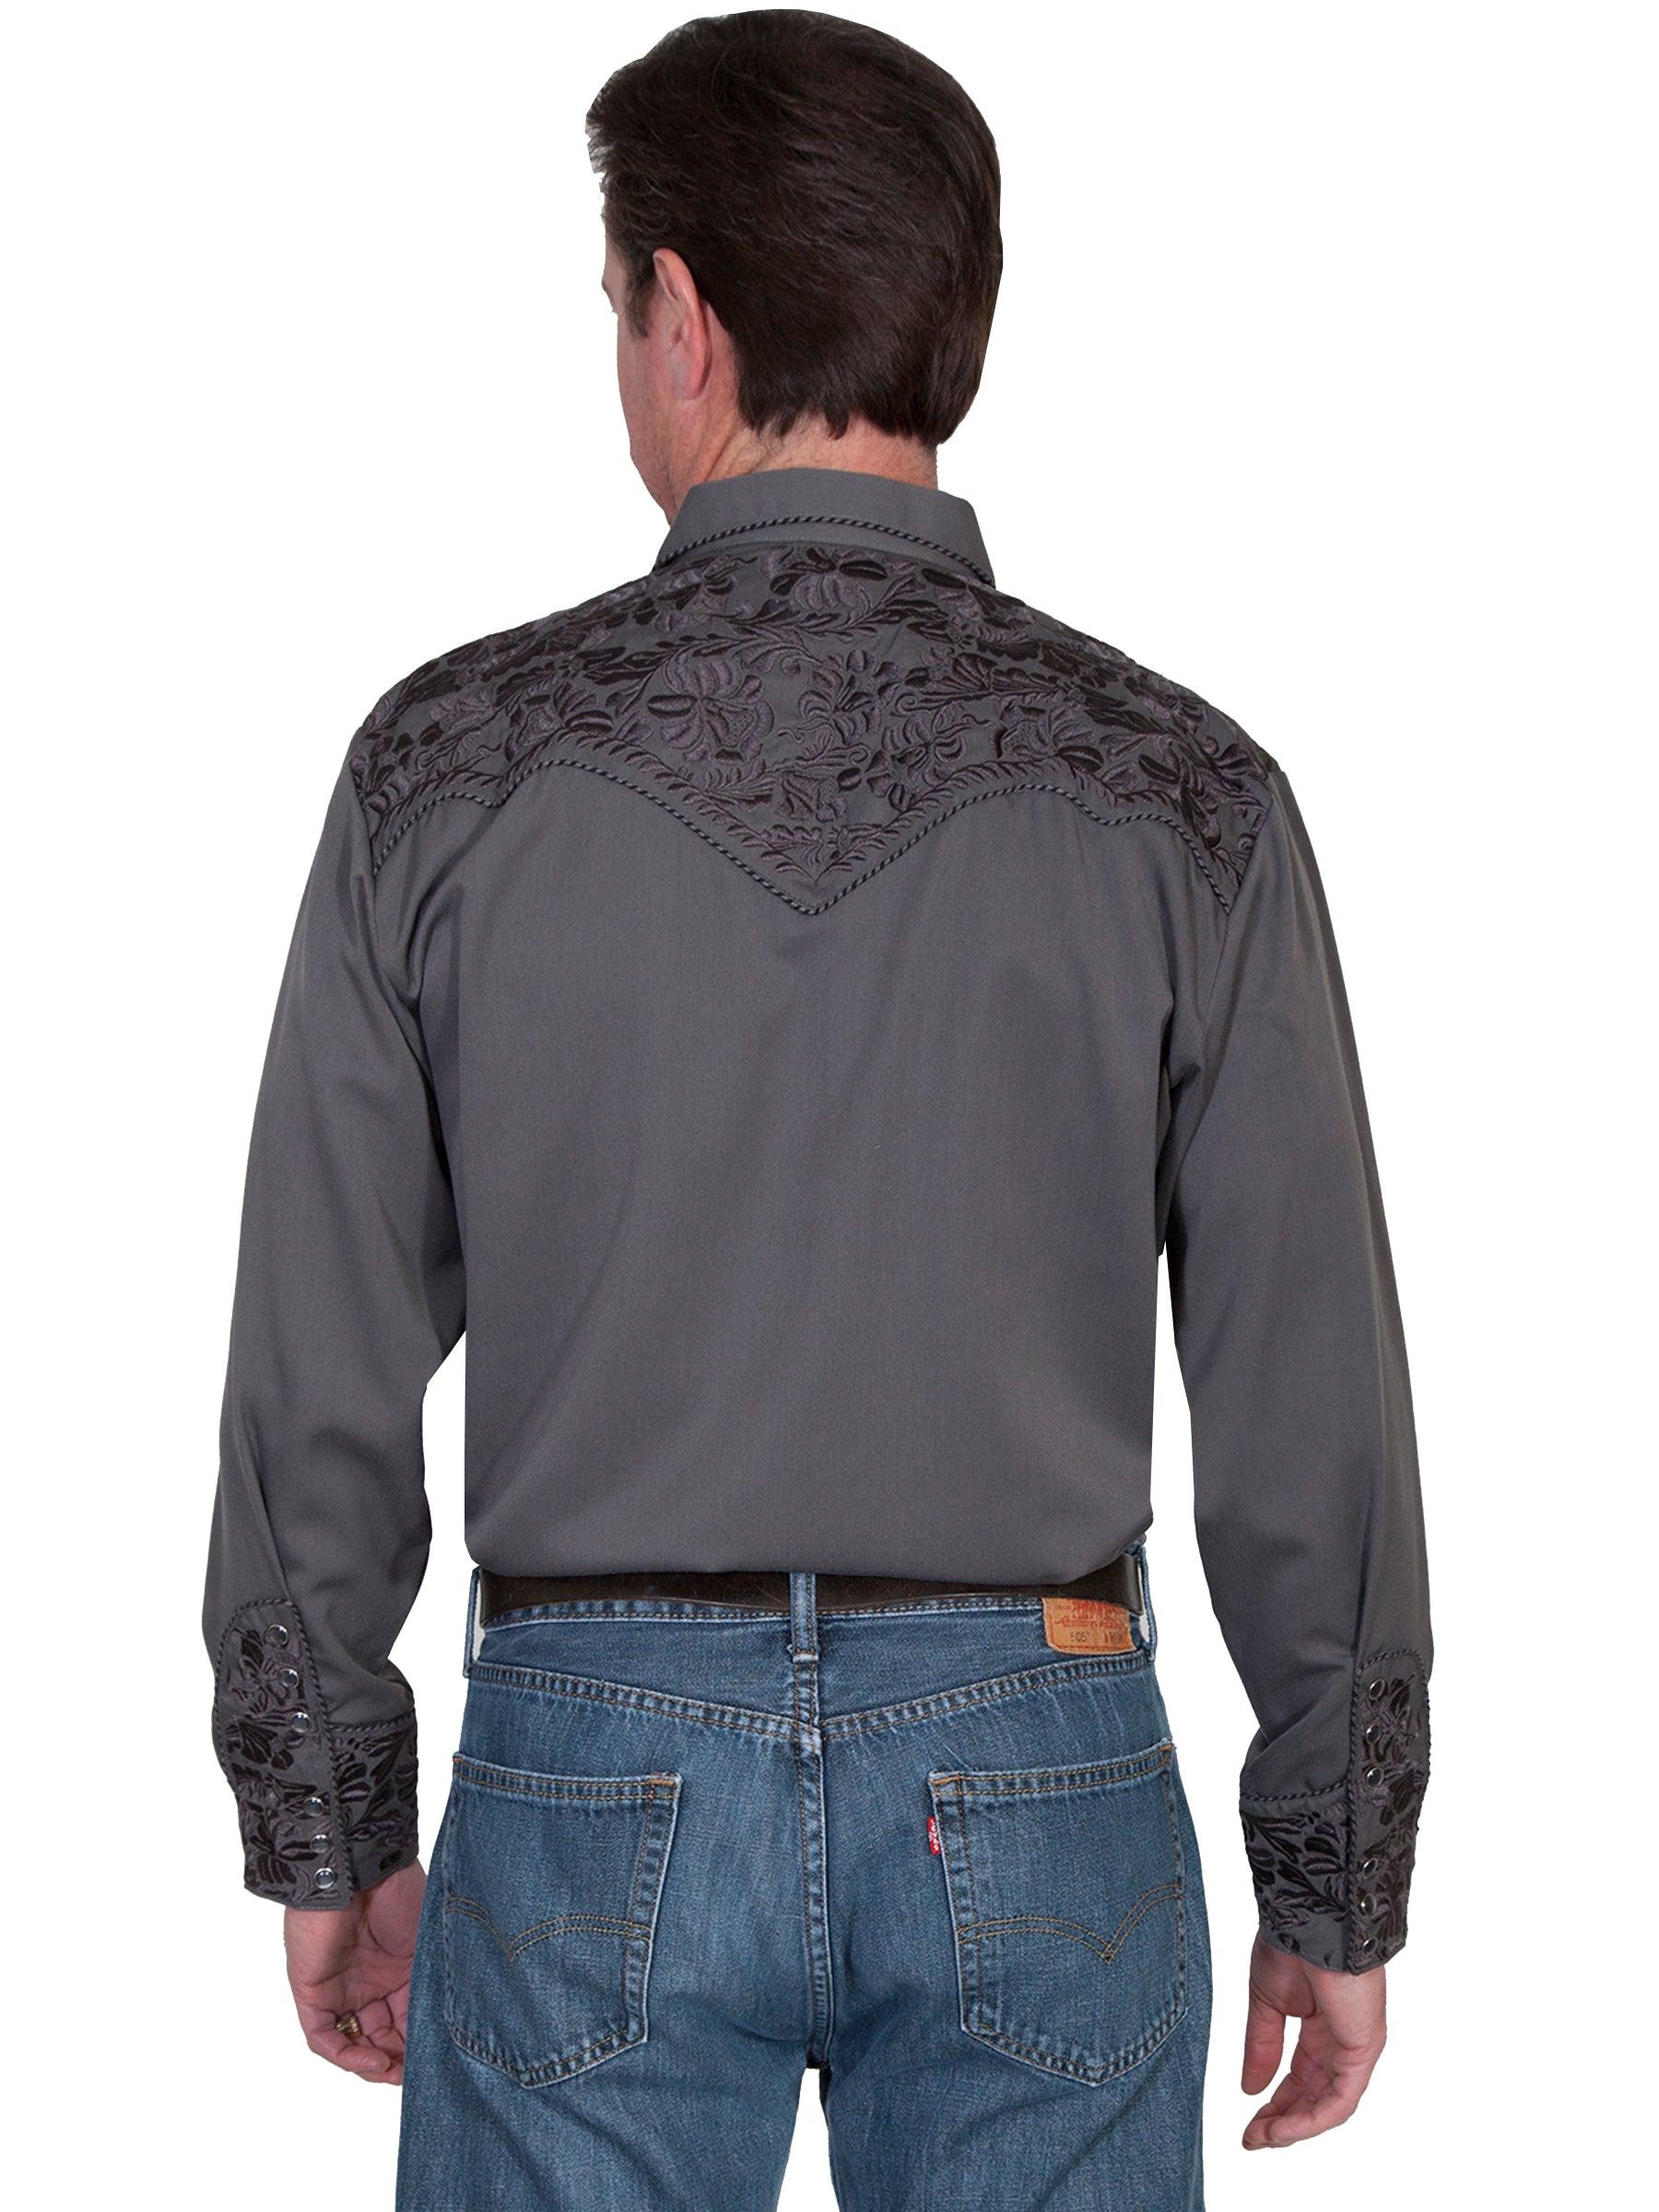 Scully CHARCOAL FLORAL TOOLED EMBROIDERY SHIRT - Flyclothing LLC